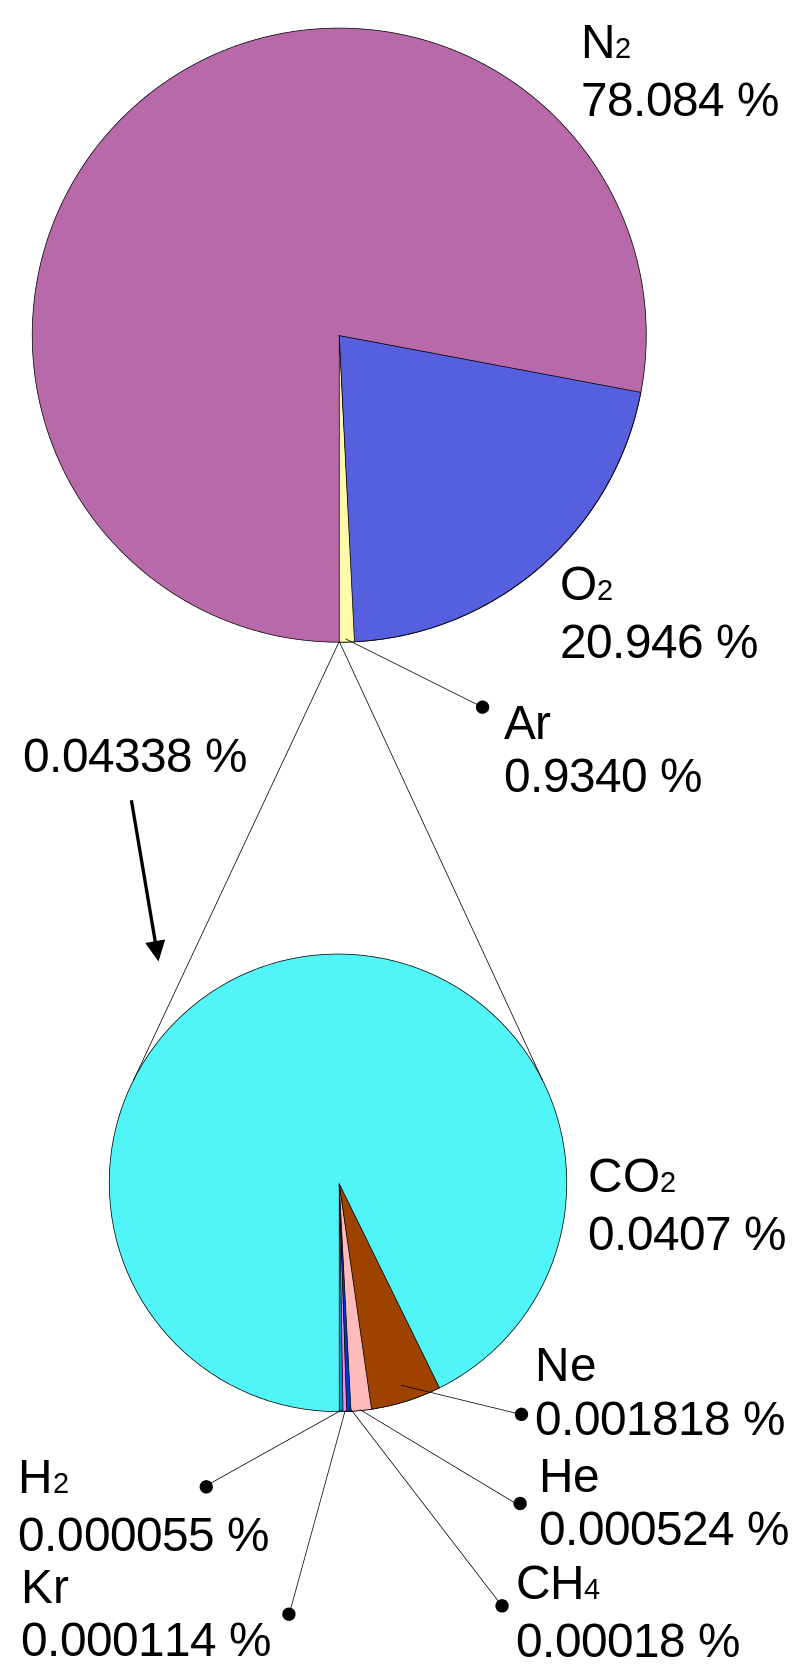 Composition of Earth's atmosphere by volume